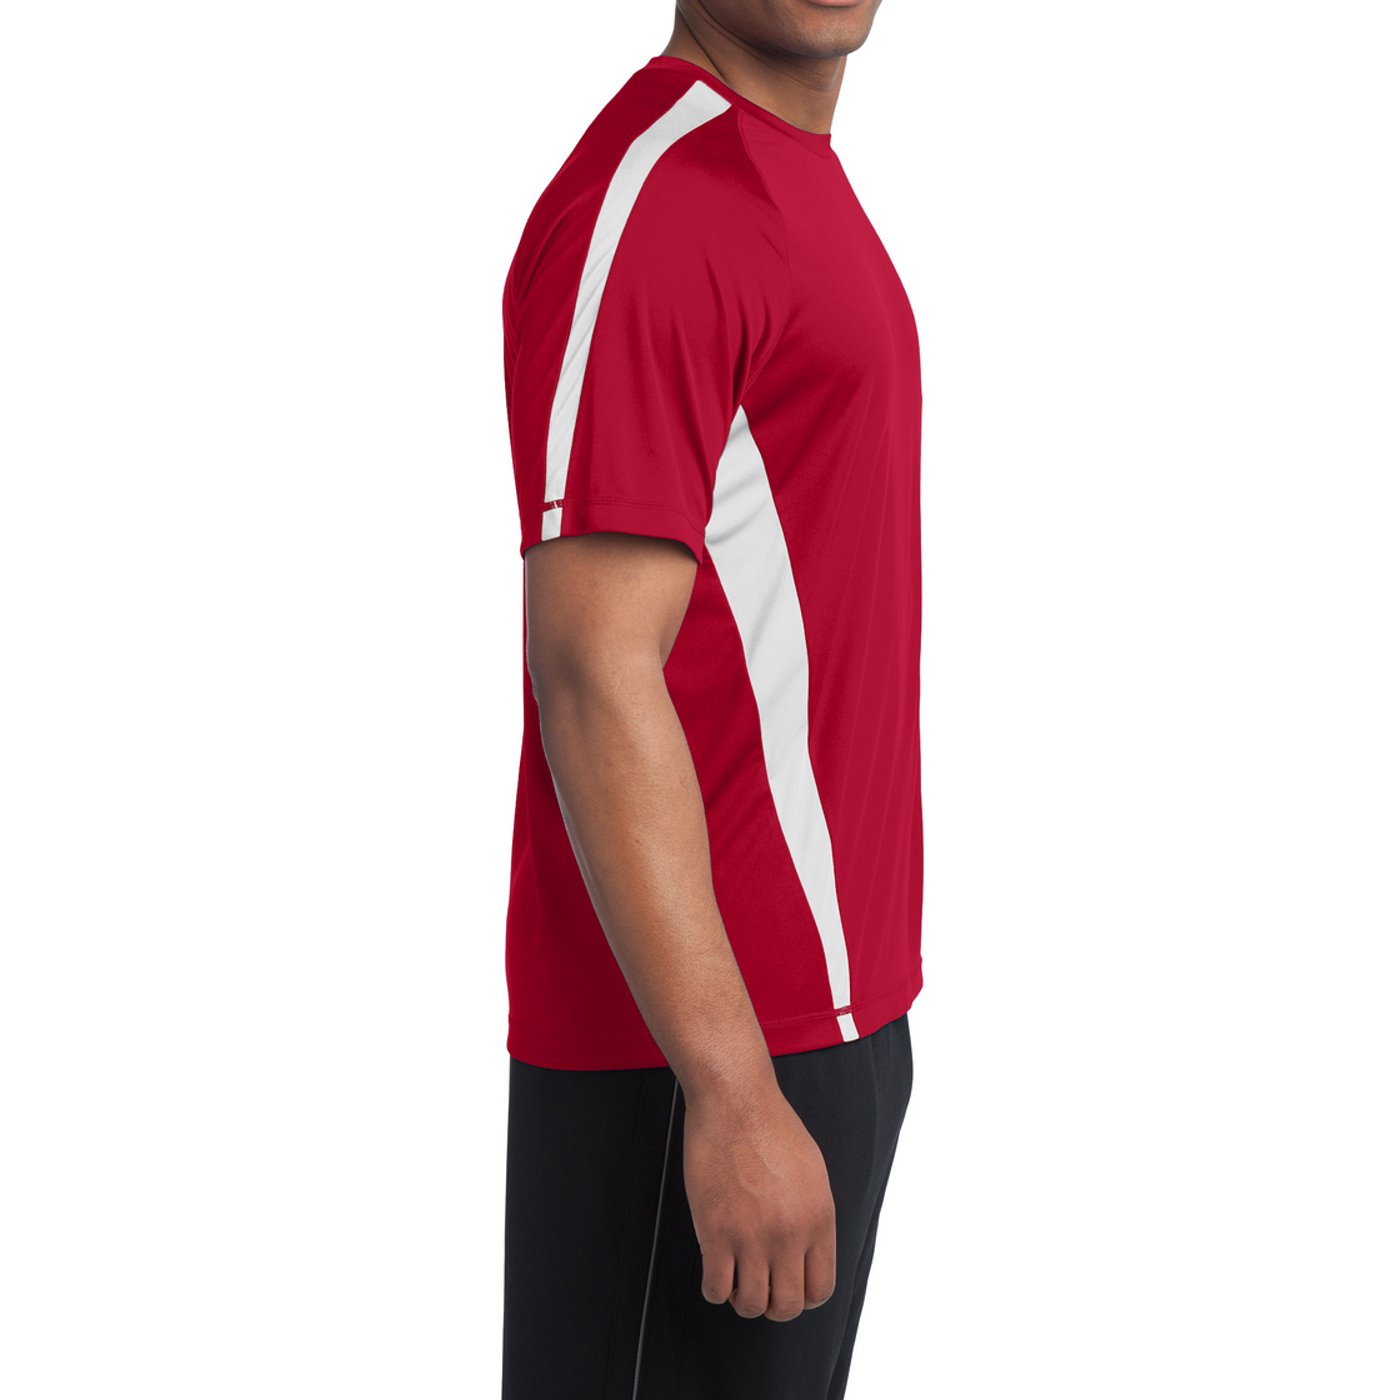 Men's Colorblock PosiCharge Competitor Tee - True Red/ White